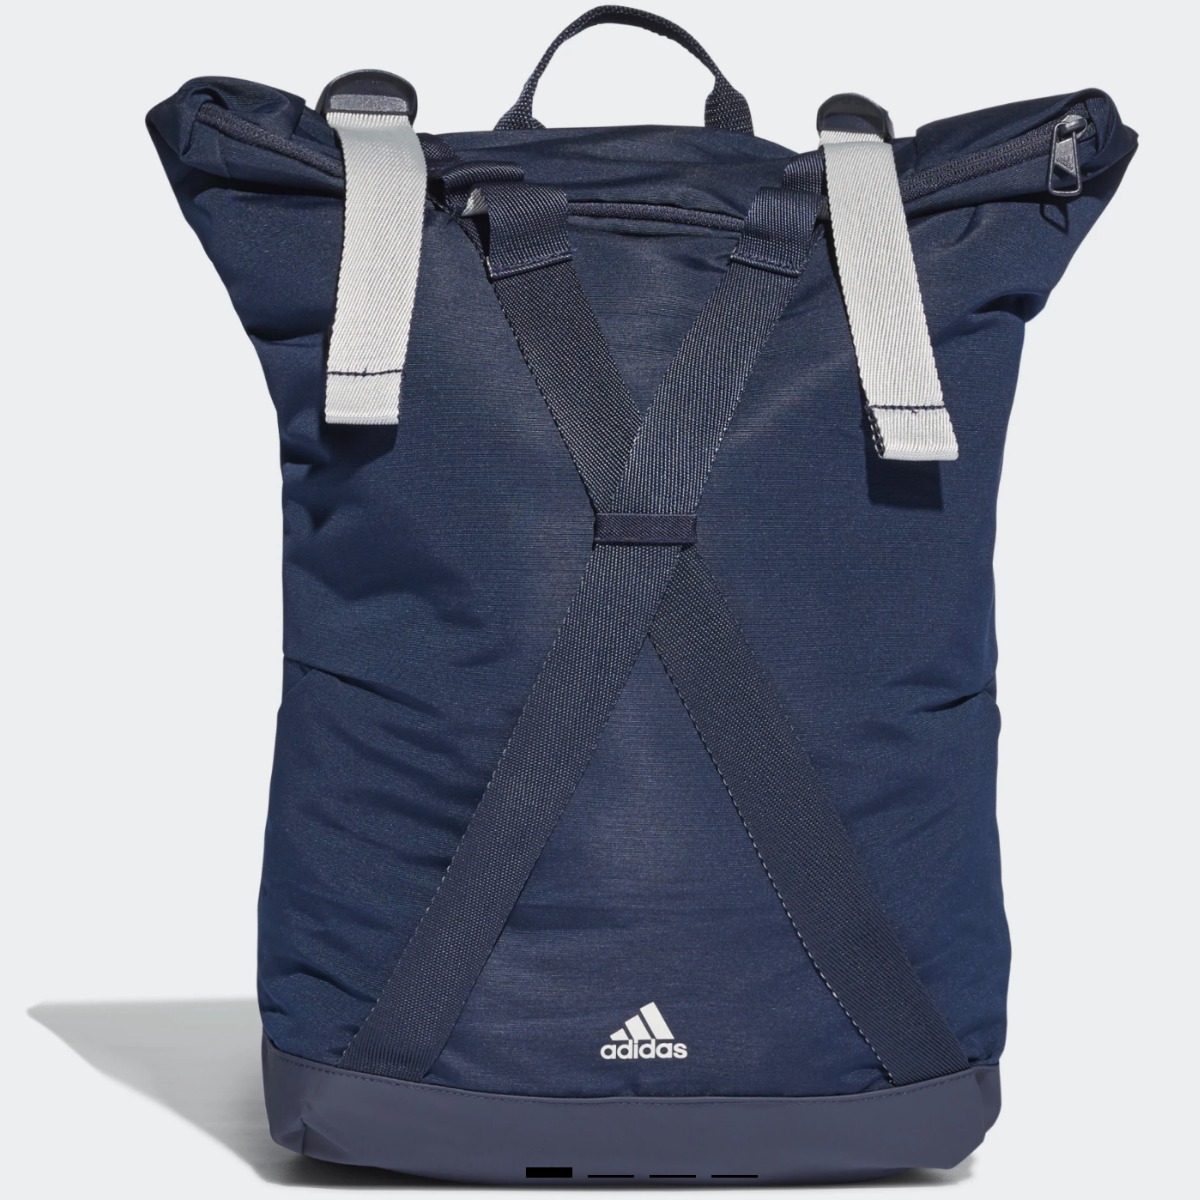 Navy blue sports bag with light gray straps from adidas